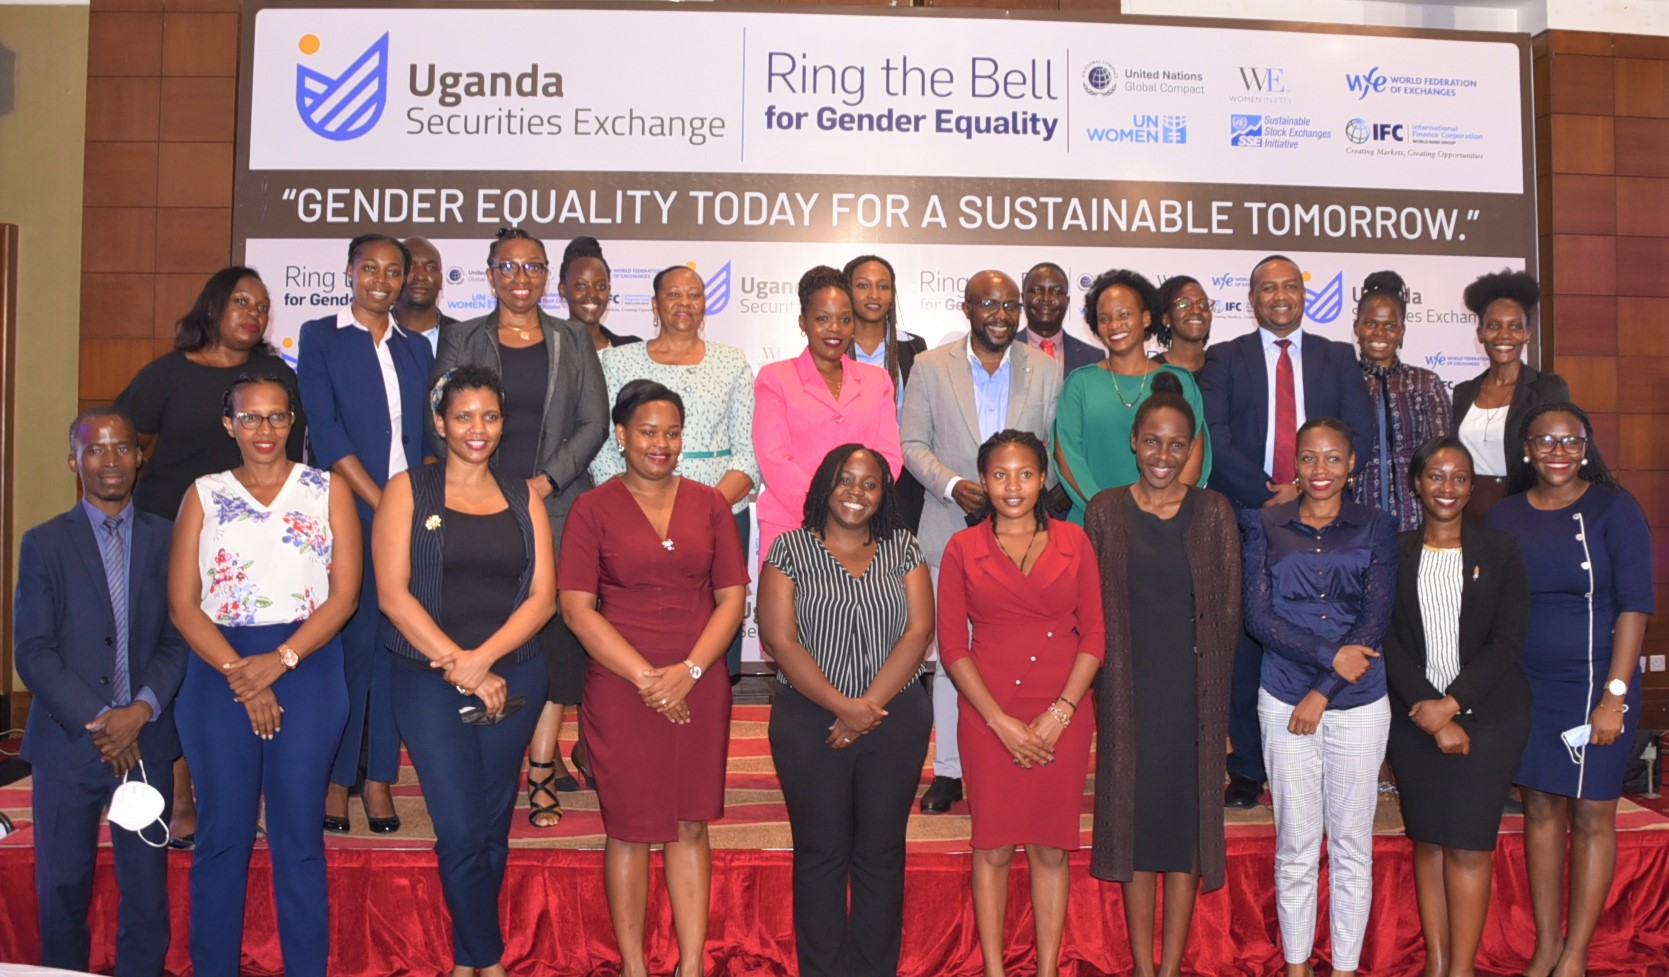 Participants of the IWD 2022 Ring The Bell commemoration in Uganda